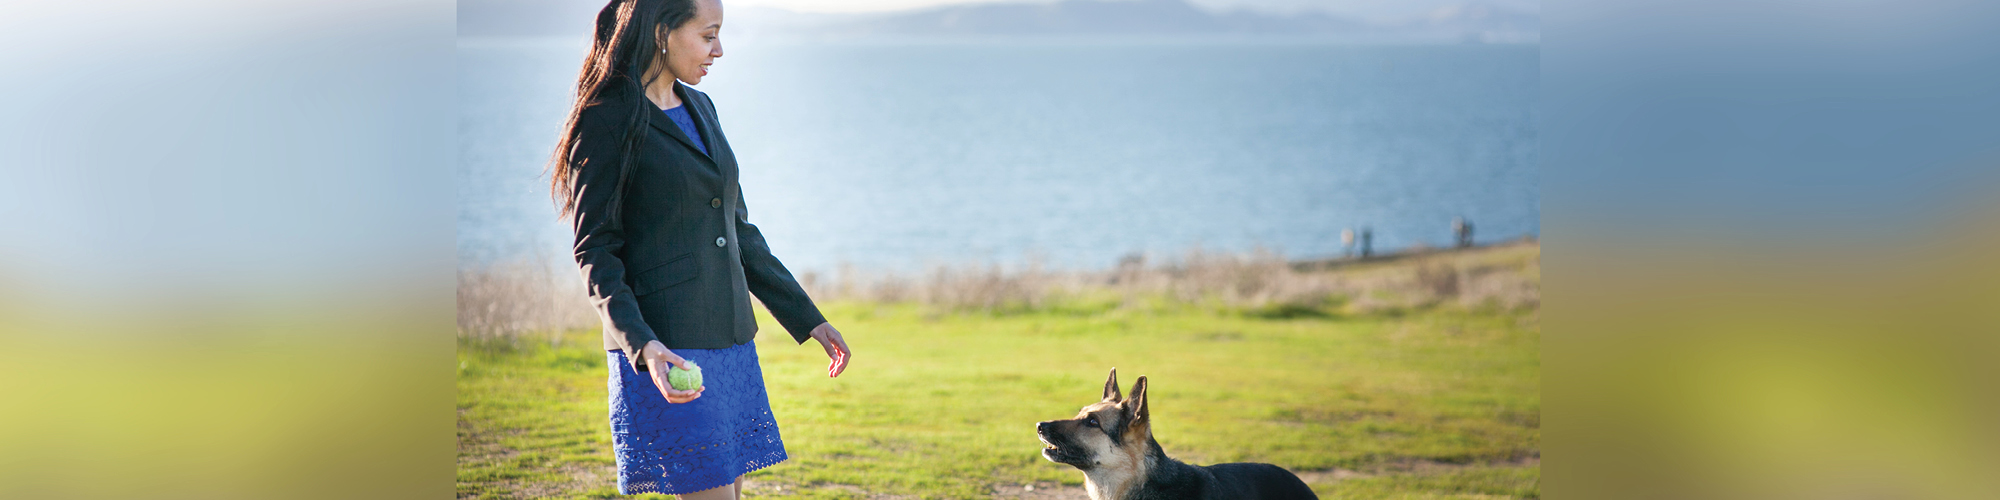 This photo is of Haben standing in a royal blue dress with a black blazer and with a light-green tennis ball in her hand. Her seeing-eye dog sees the ball and anticipates she will play by throwing it. It is a sunny day. They are standing on grass that is green with brown dirt patches. In the background, a body of water is blurred in the top third of the photo. 